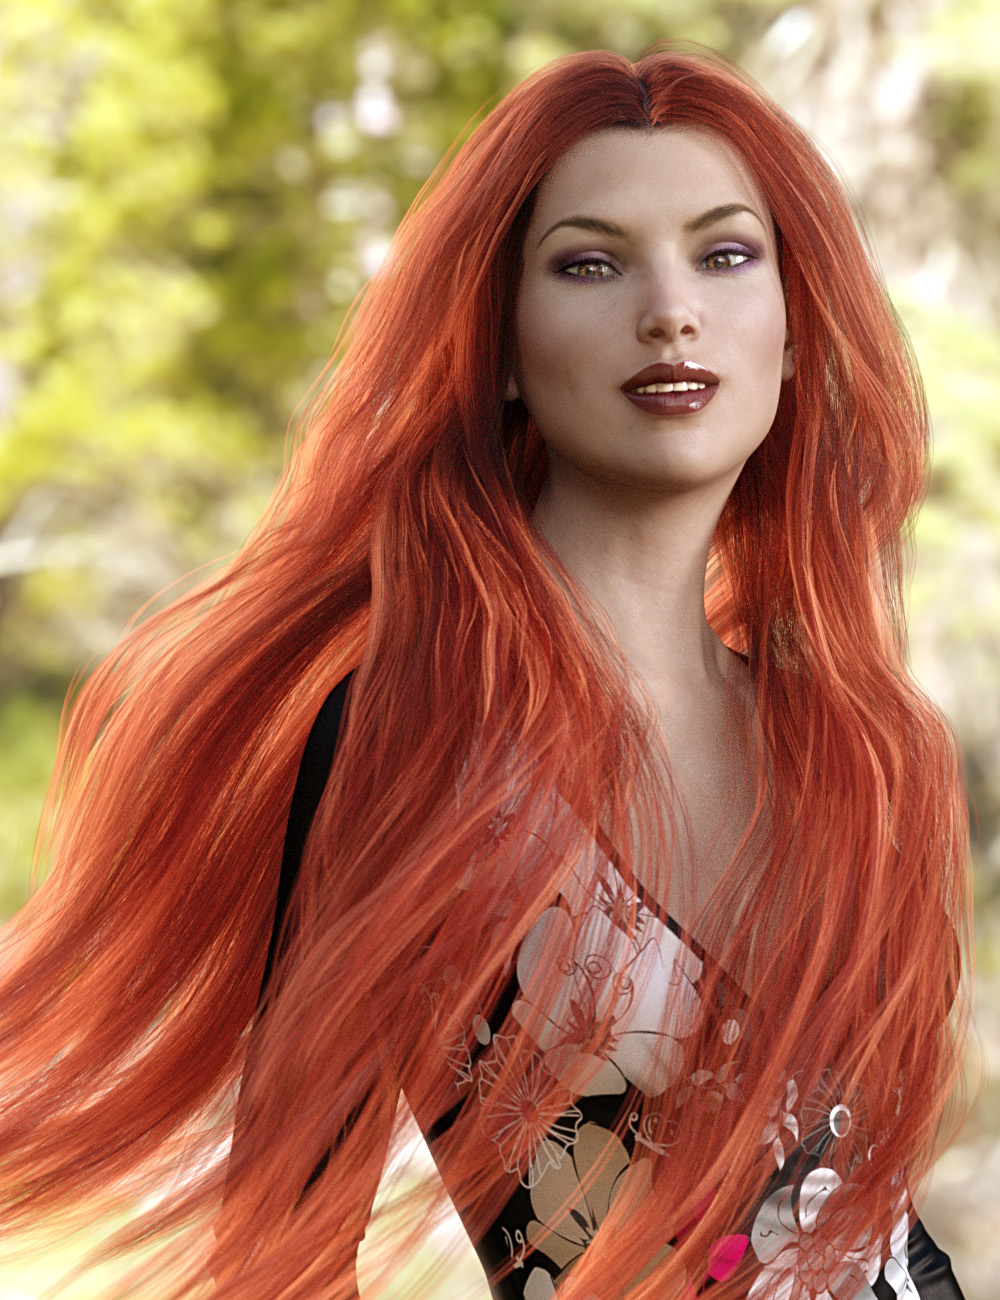 Hair Lustre Shaders for Iray by: PhilW, 3D Models by Daz 3D